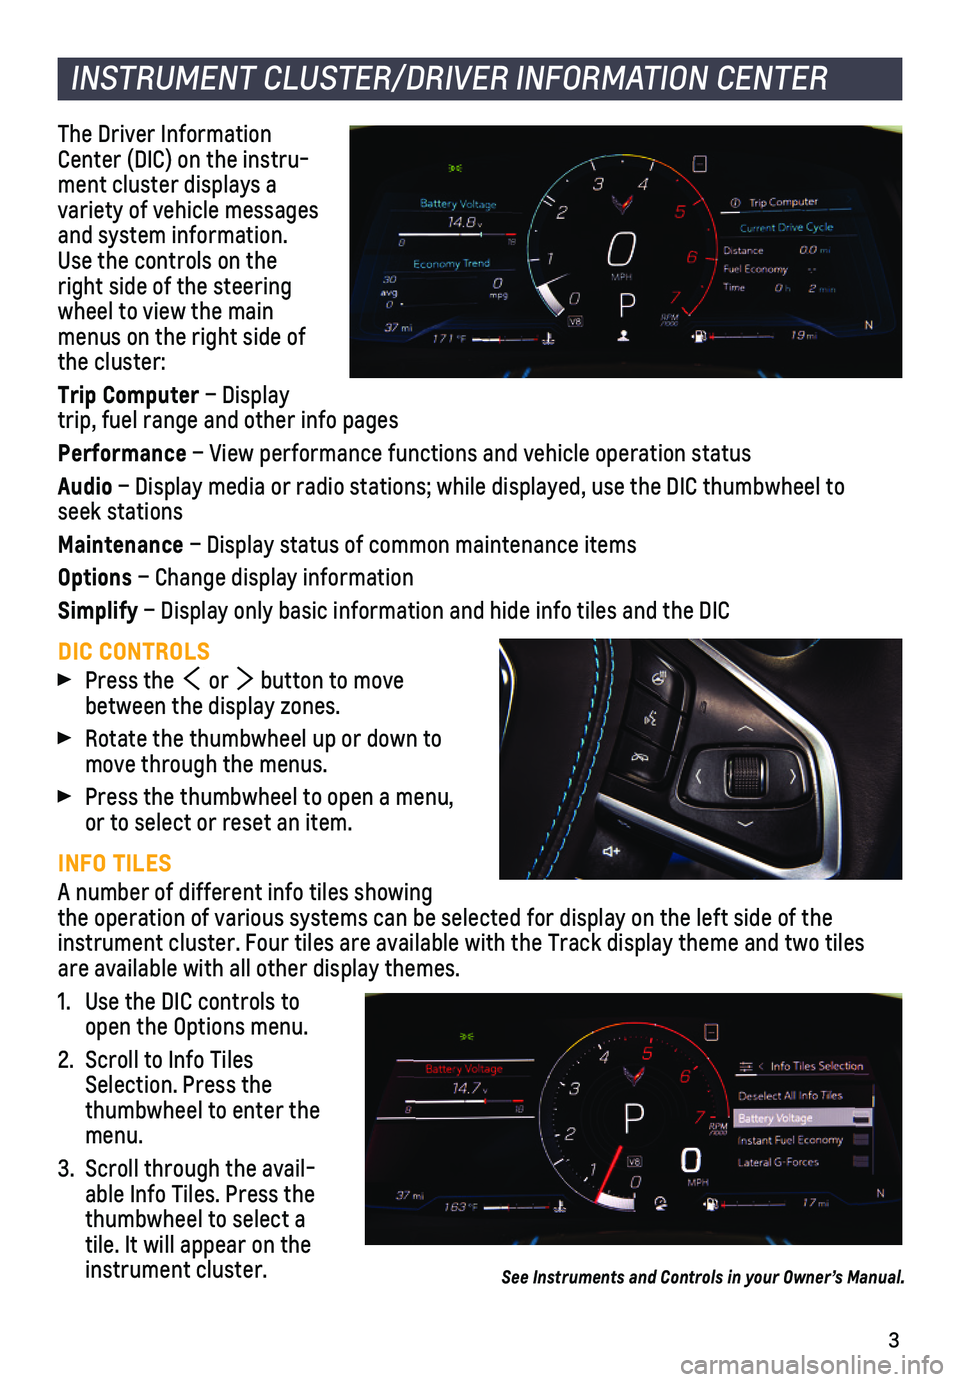 CHEVROLET CORVETTE 2021  Performance Get To Know Guide 3
INSTRUMENT CLUSTER/DRIVER INFORMATION CENTER
The Driver Information Center (DIC) on the instru-ment cluster displays a variety of vehicle messages and system information. Use the controls on the rig